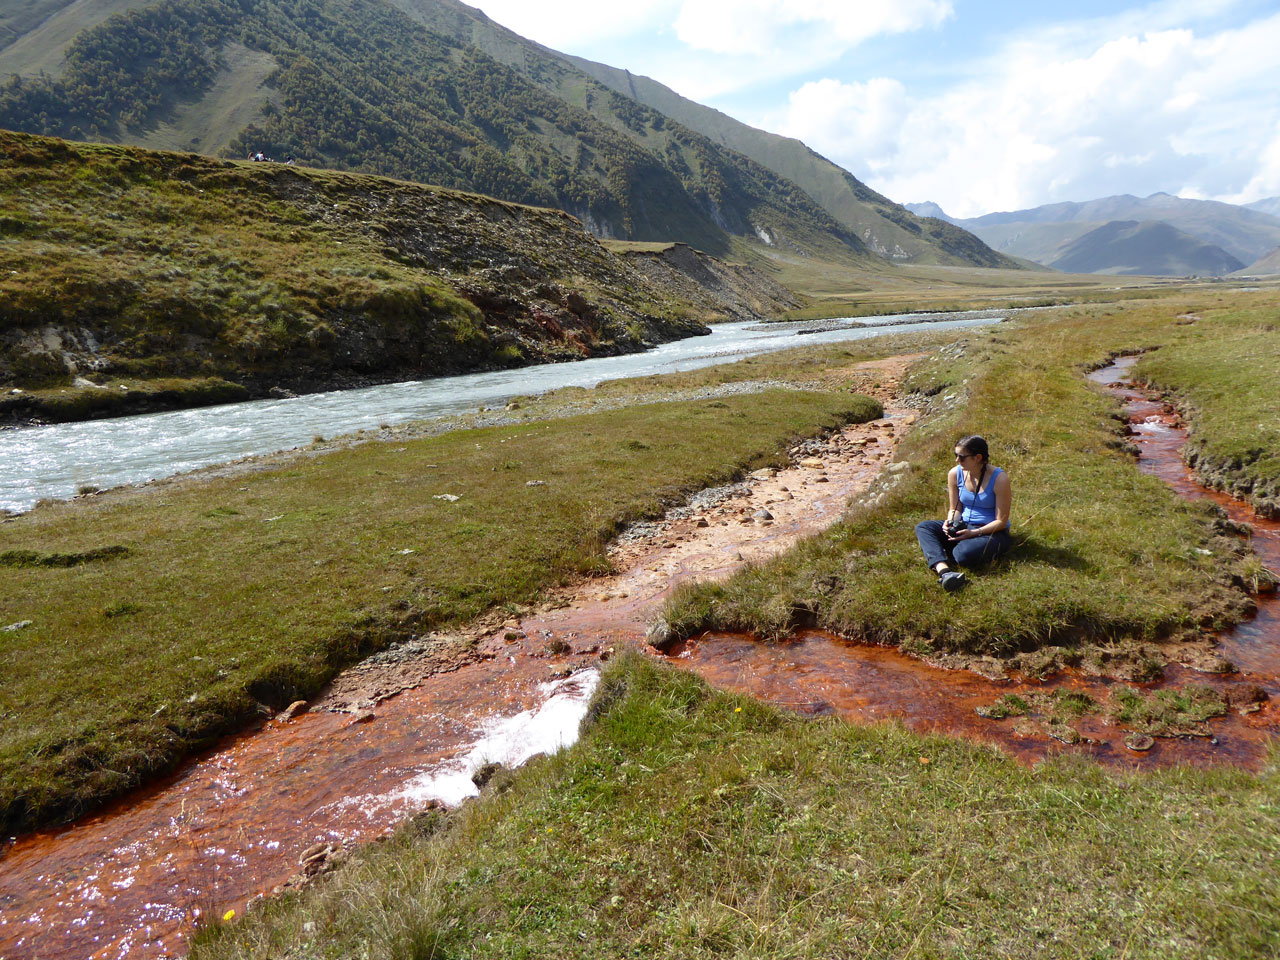 Red mineral streams in the Truso Valley, Georgia